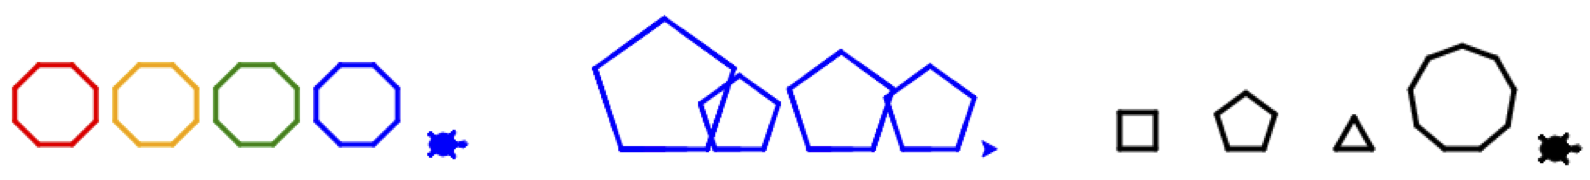 Images showing three rows of shapes with different: 1) colors, 2) sizes, 3) number of sides.